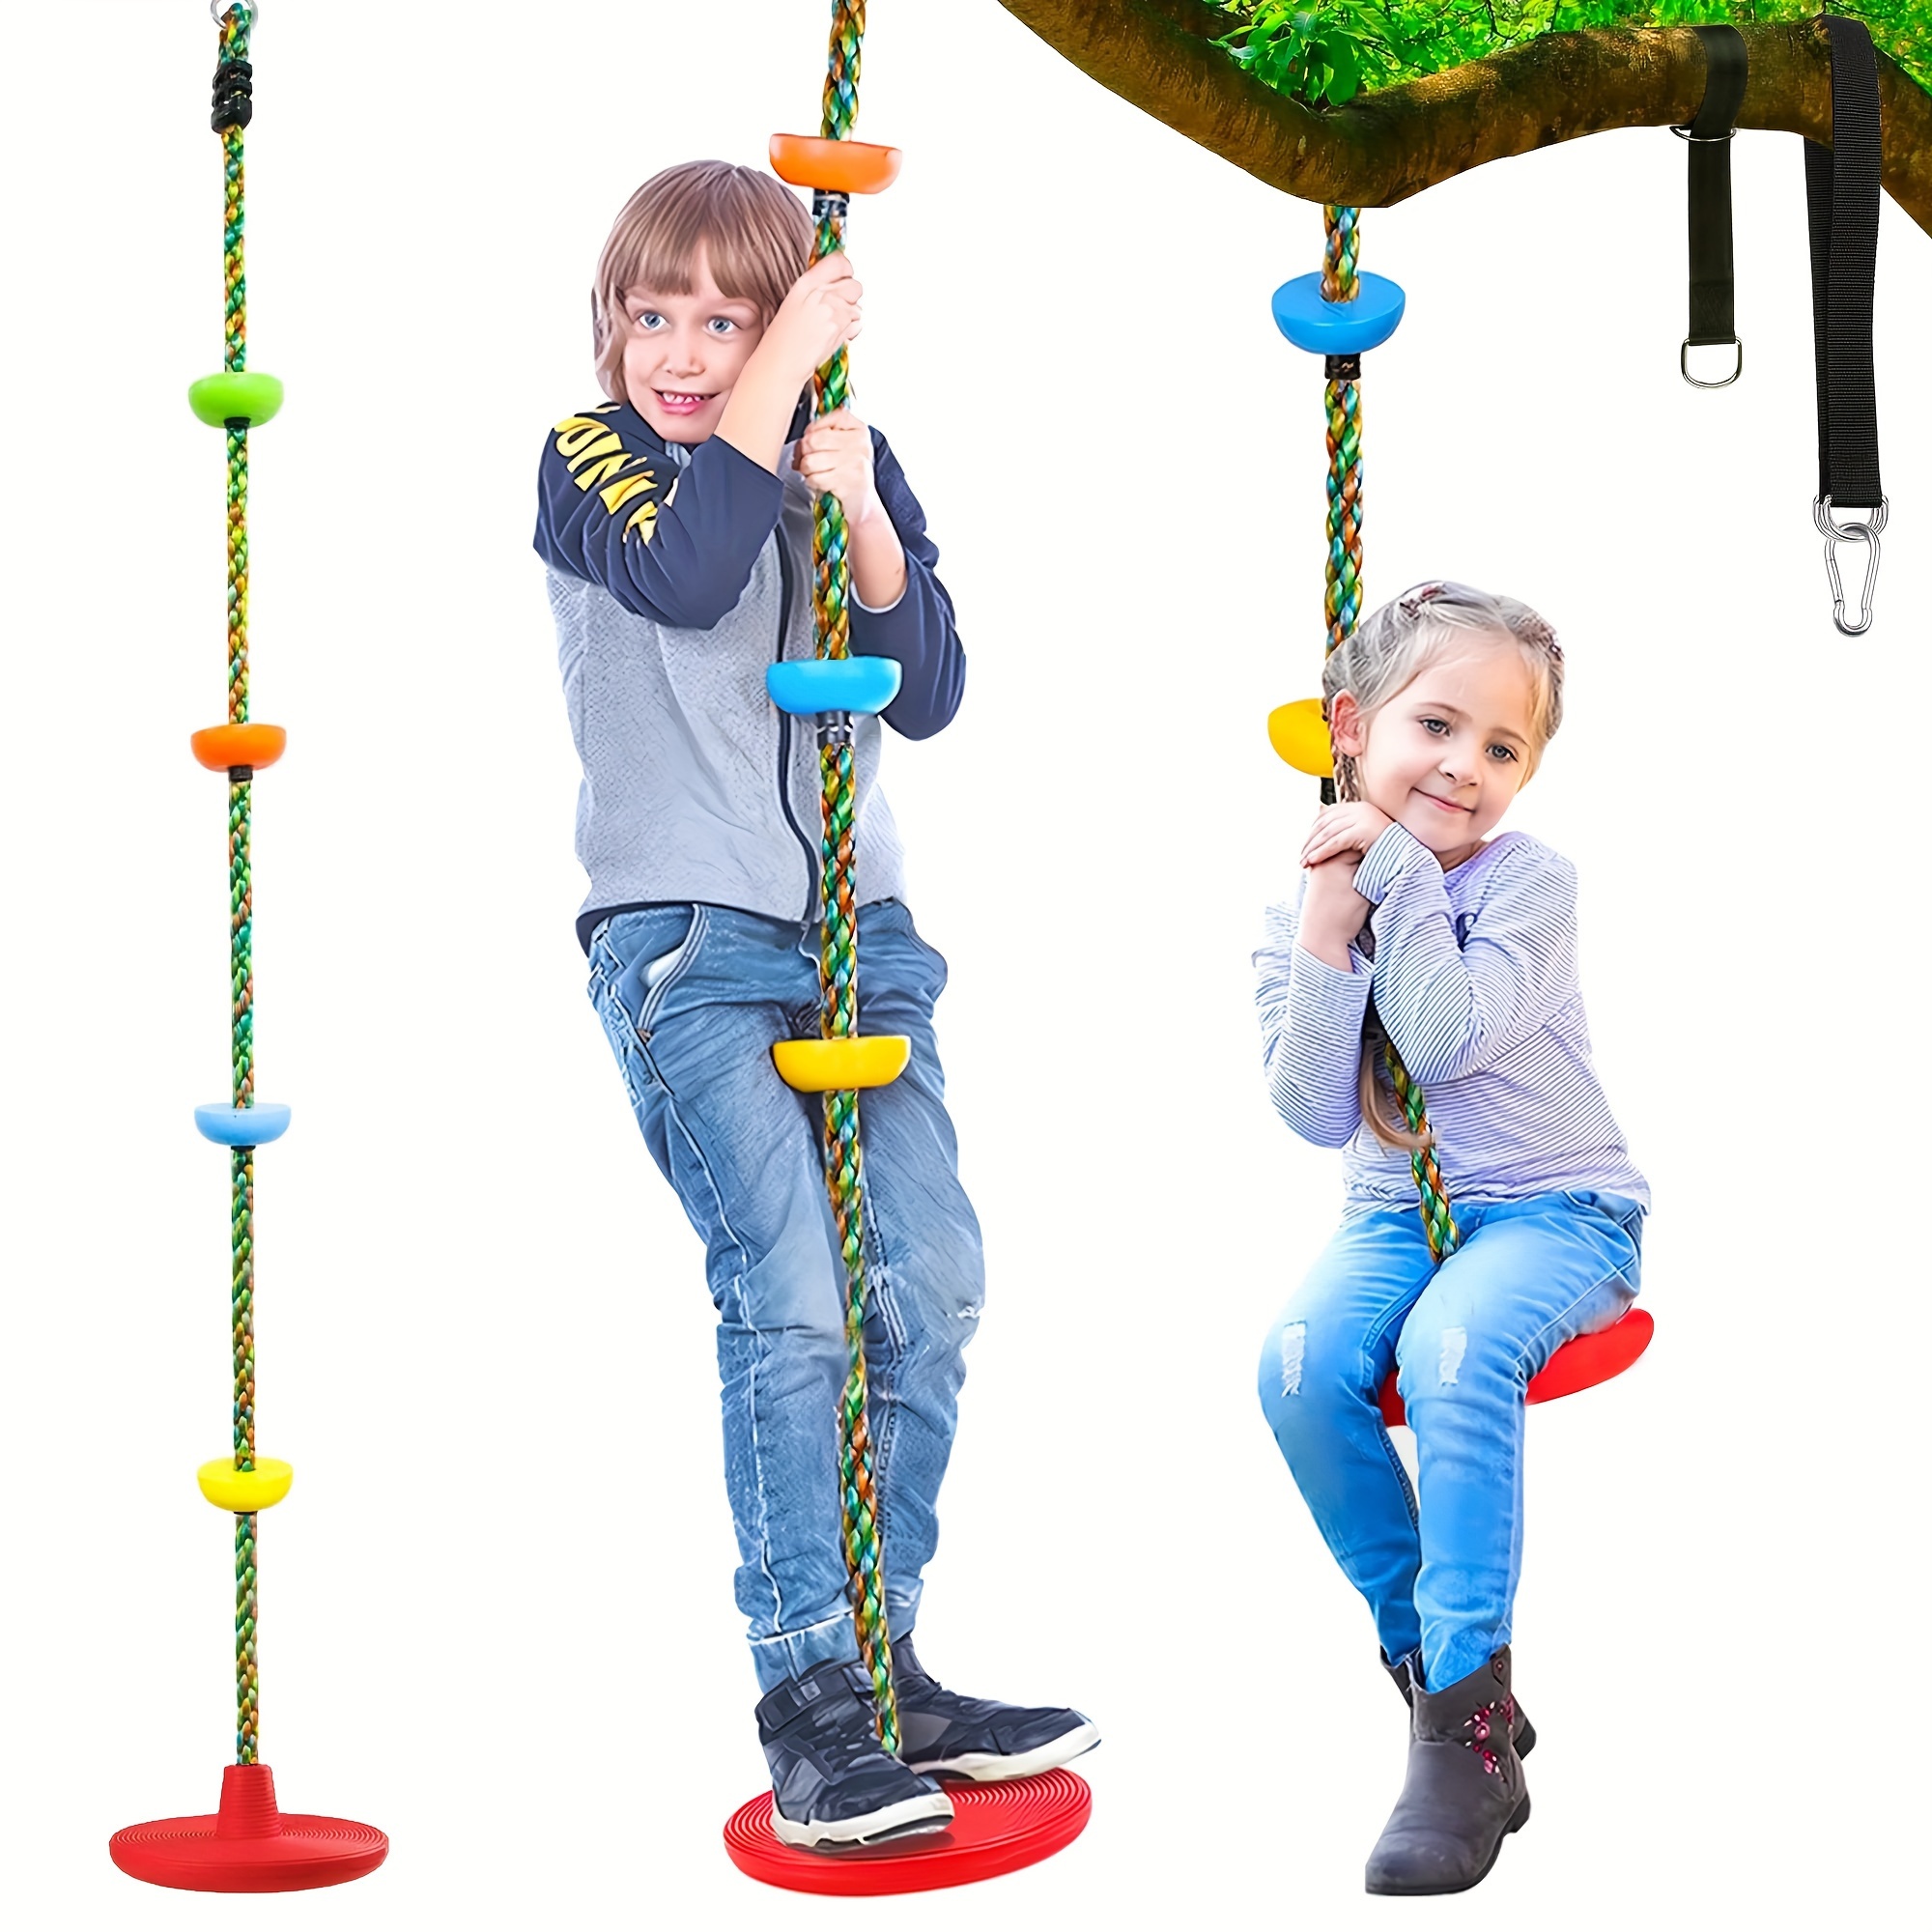 Climbing Rope Ladder Kids Tree Swing with Hanging Strap, Indoor and Outdoor  Backyard Playground Play Swing Sets Climber Training Accessories